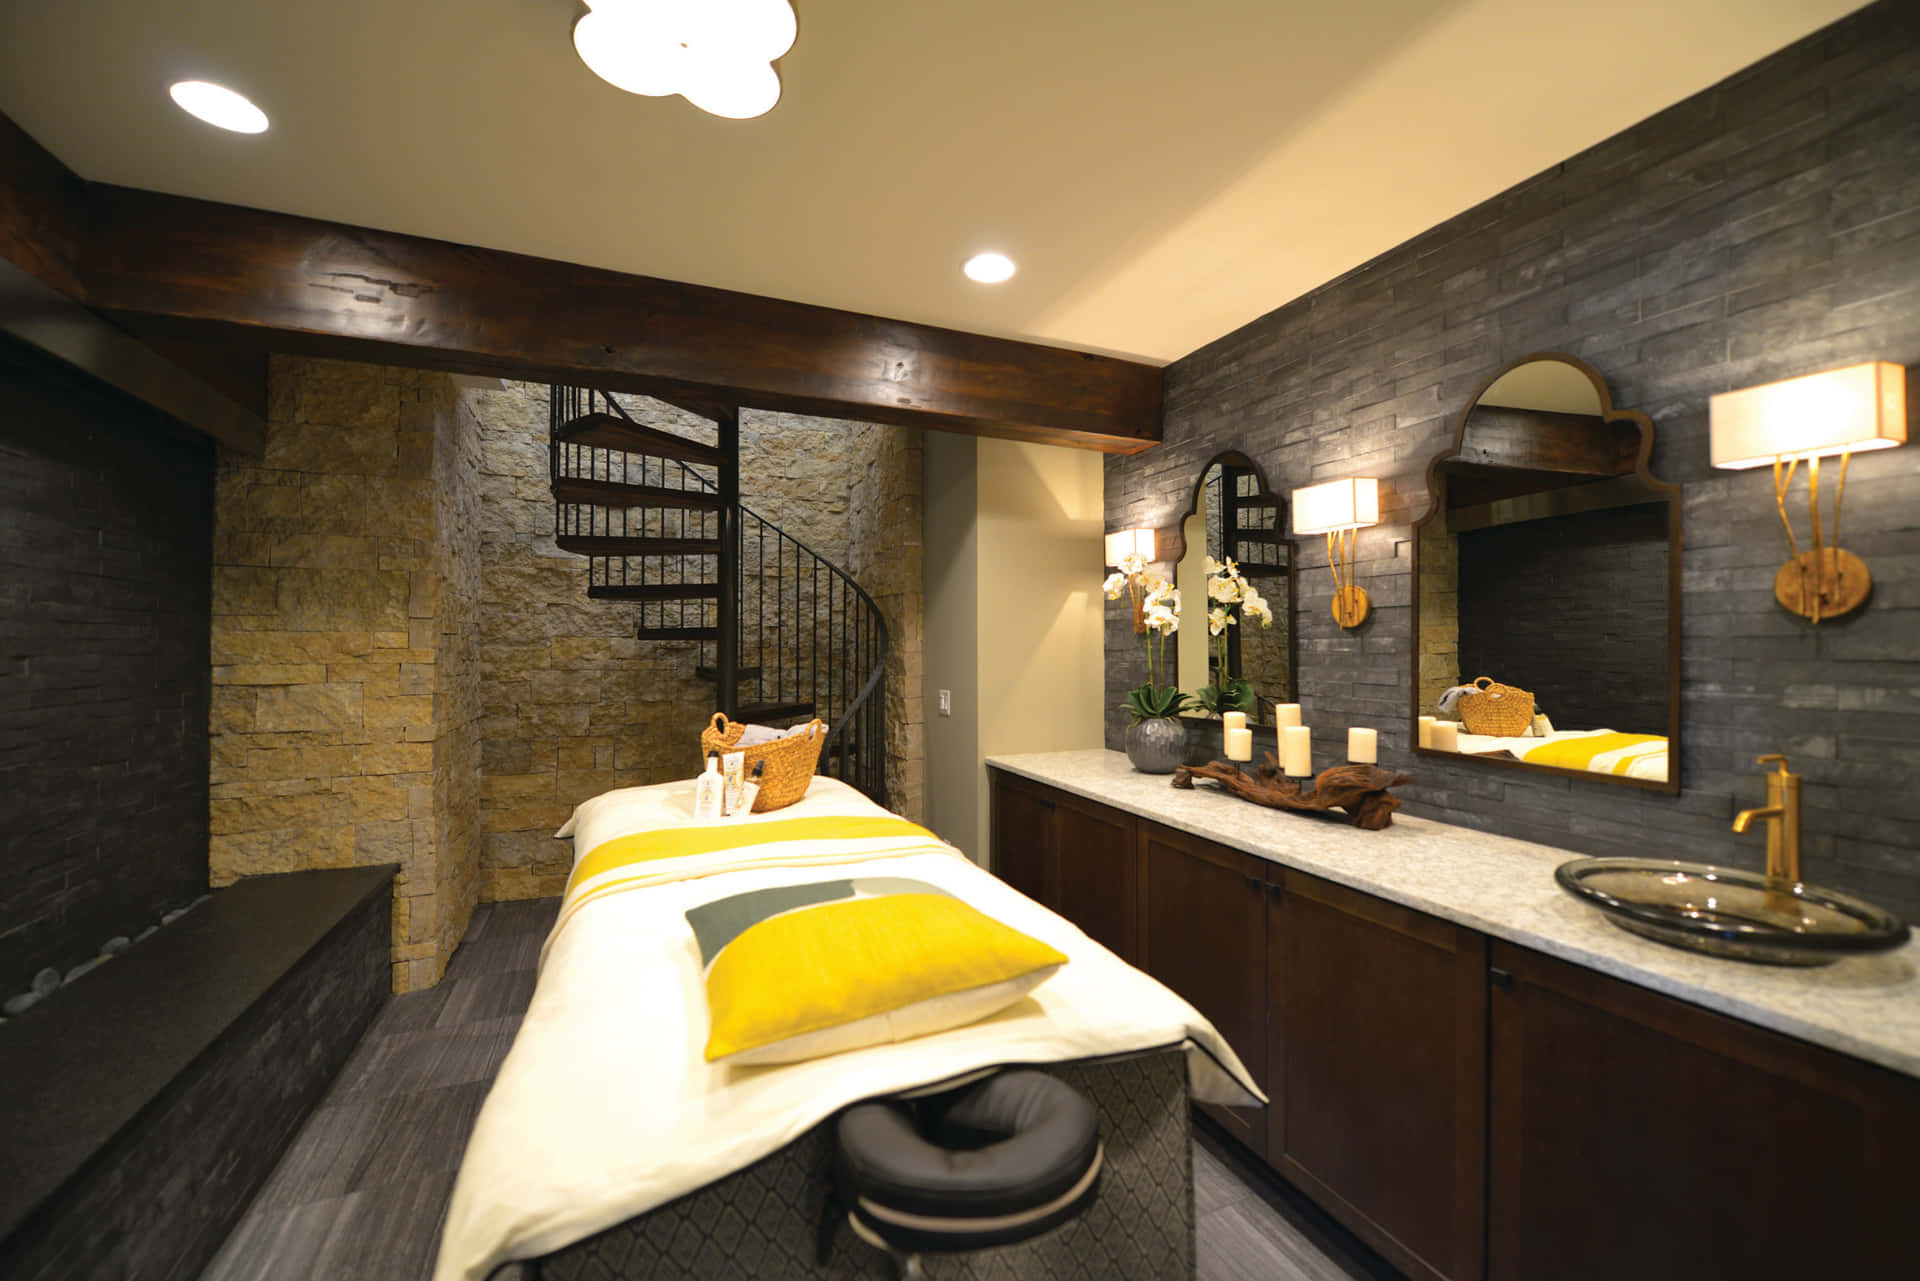 Take a Moment to Relax and Unwind in a Sophisticated Massage Room